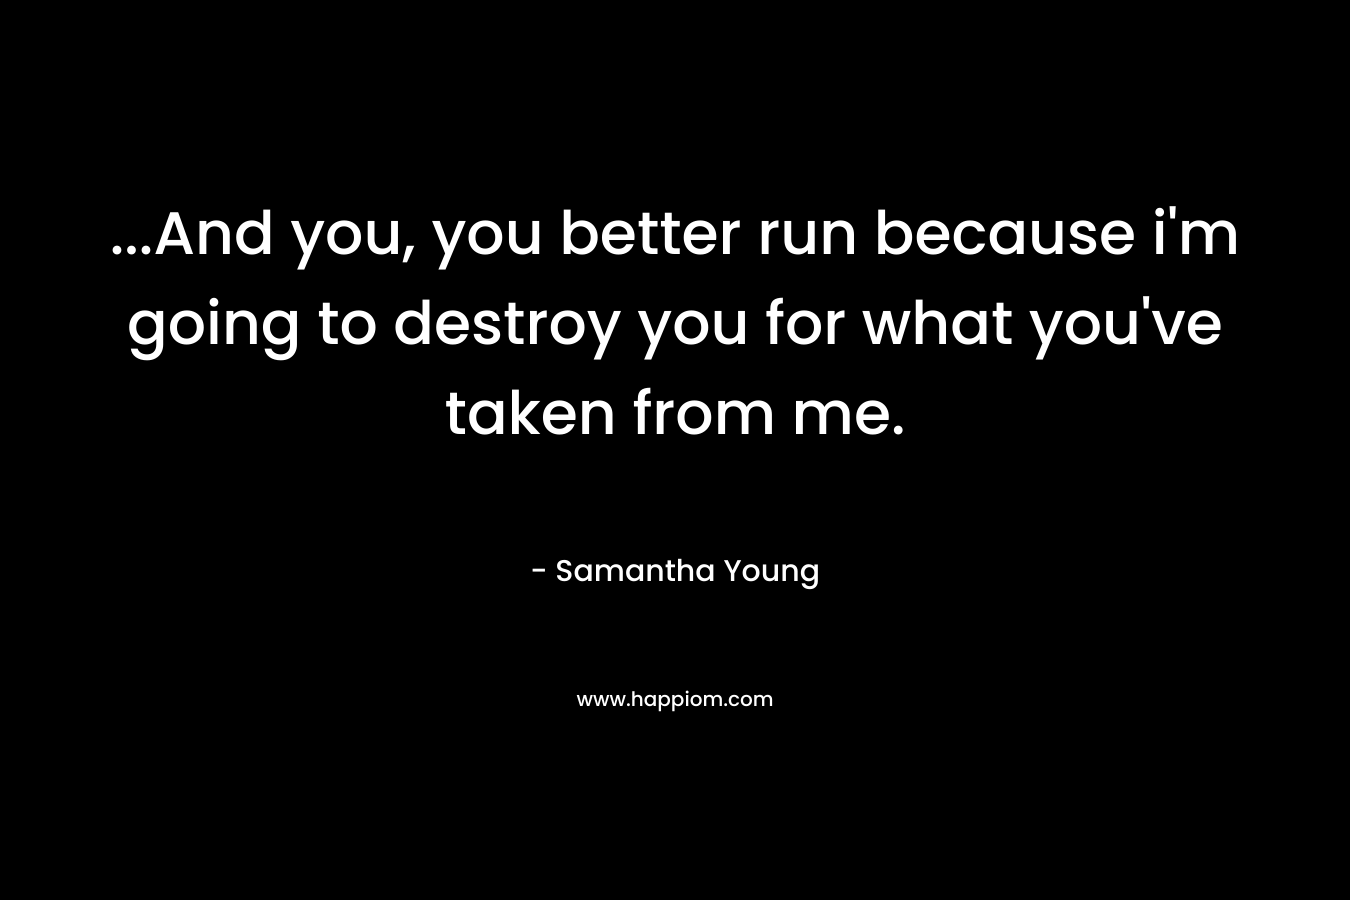 …And you, you better run because i’m going to destroy you for what you’ve taken from me. – Samantha Young